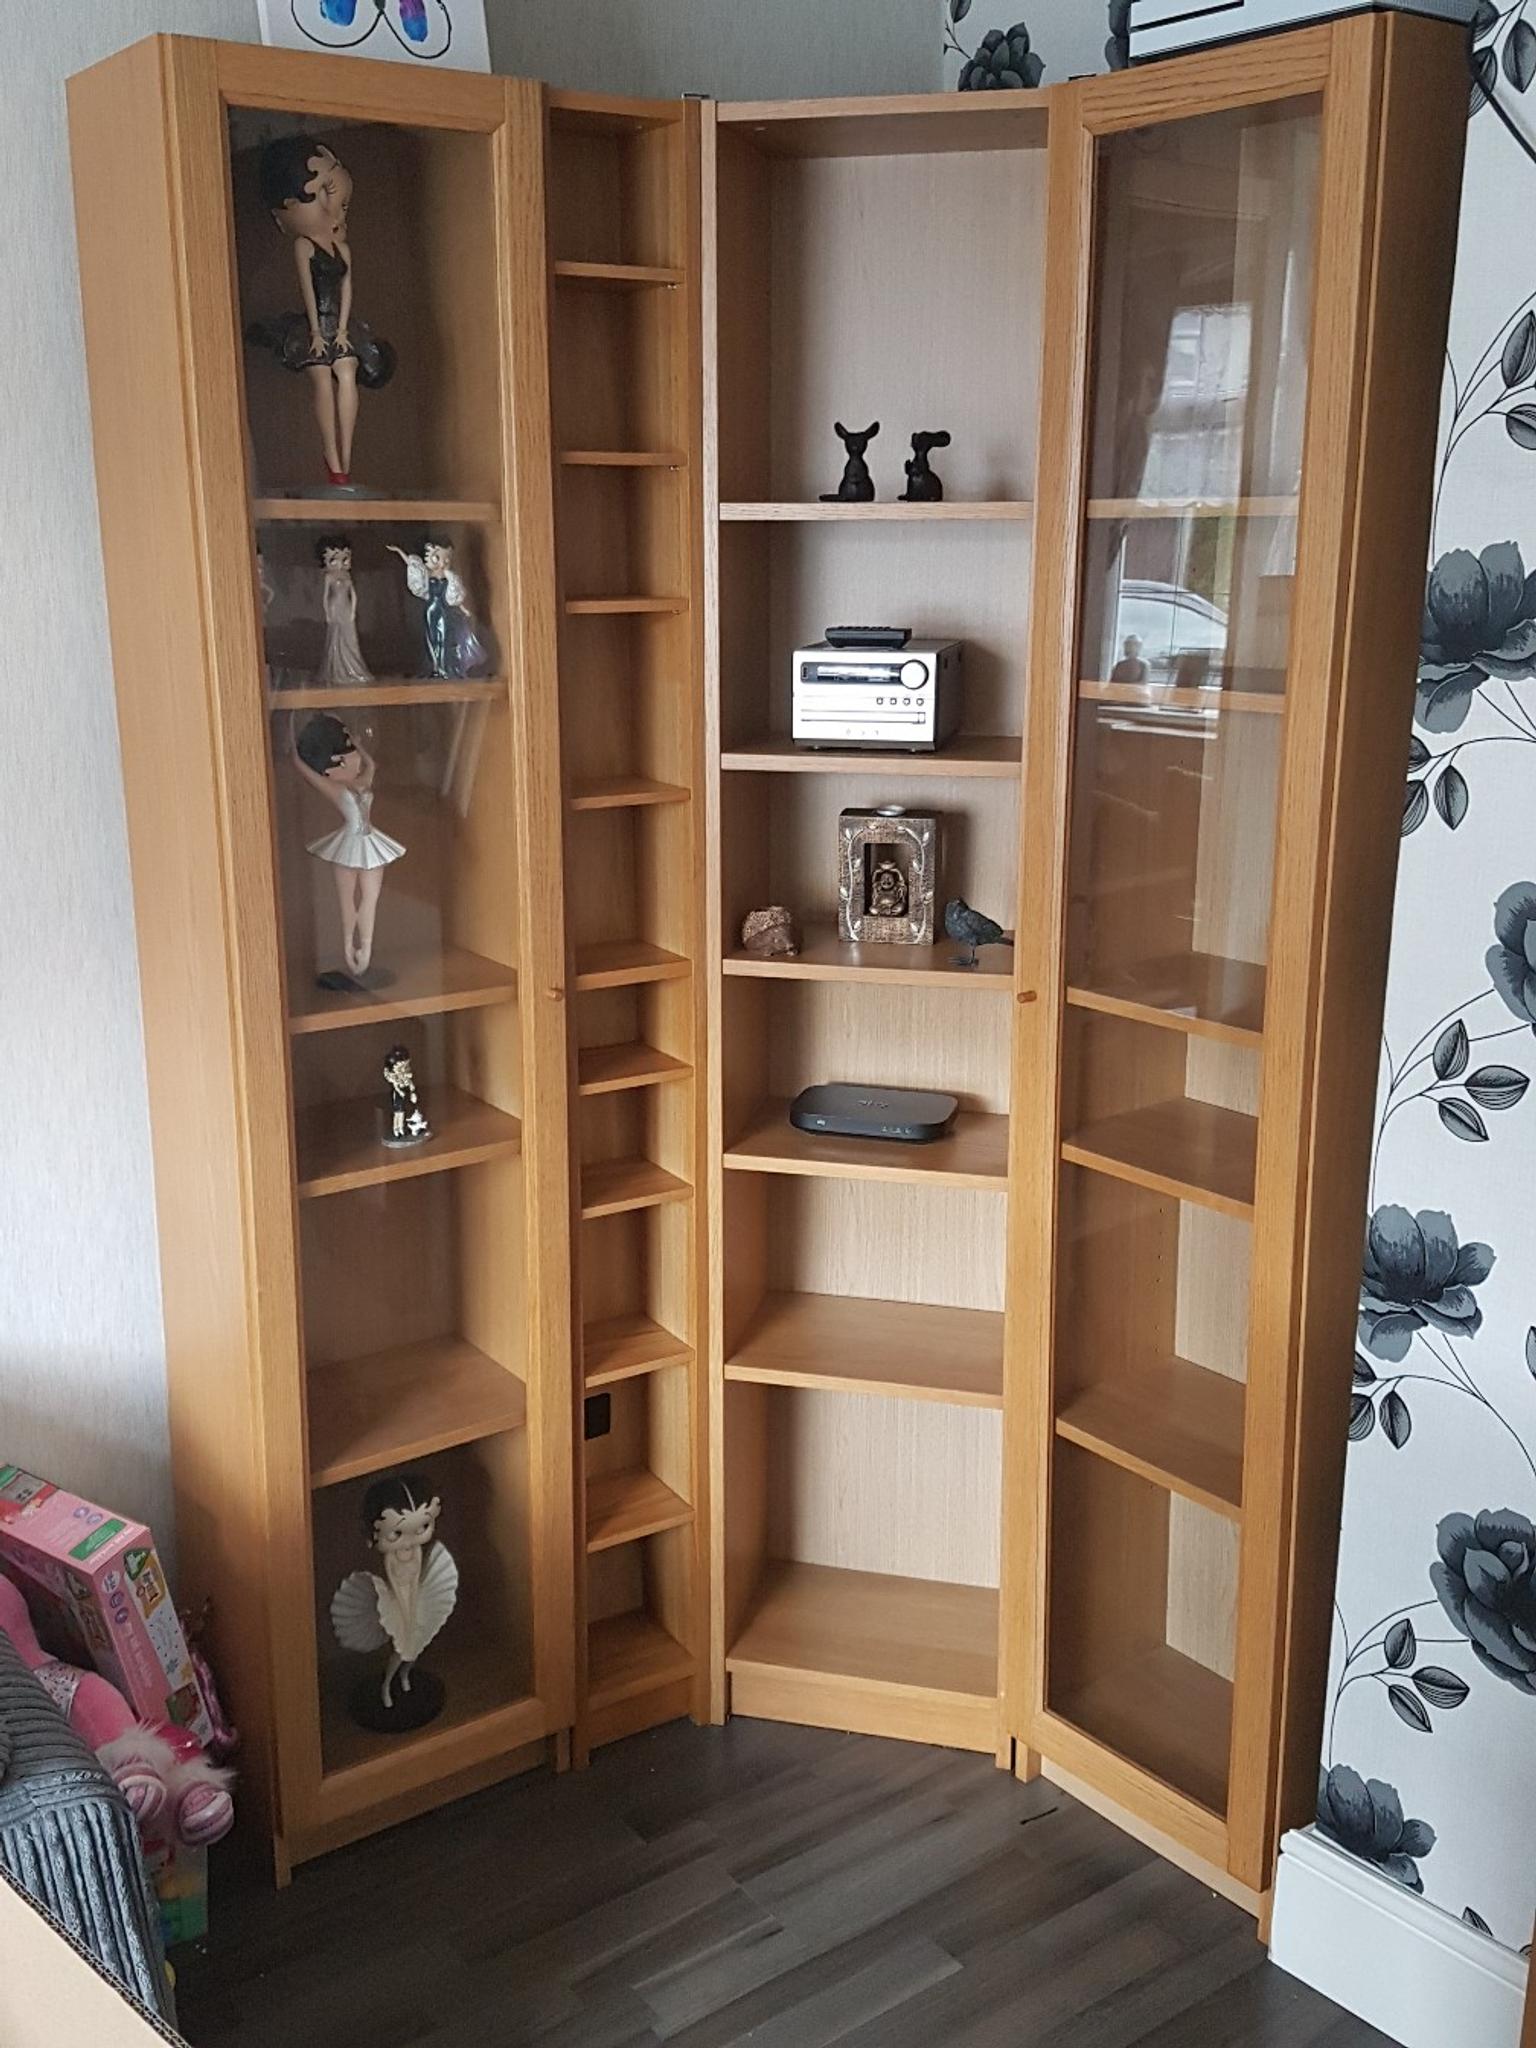 Ikea Billy Bookcase Unit In Dy4 Sandwell For 180 00 For Sale Shpock